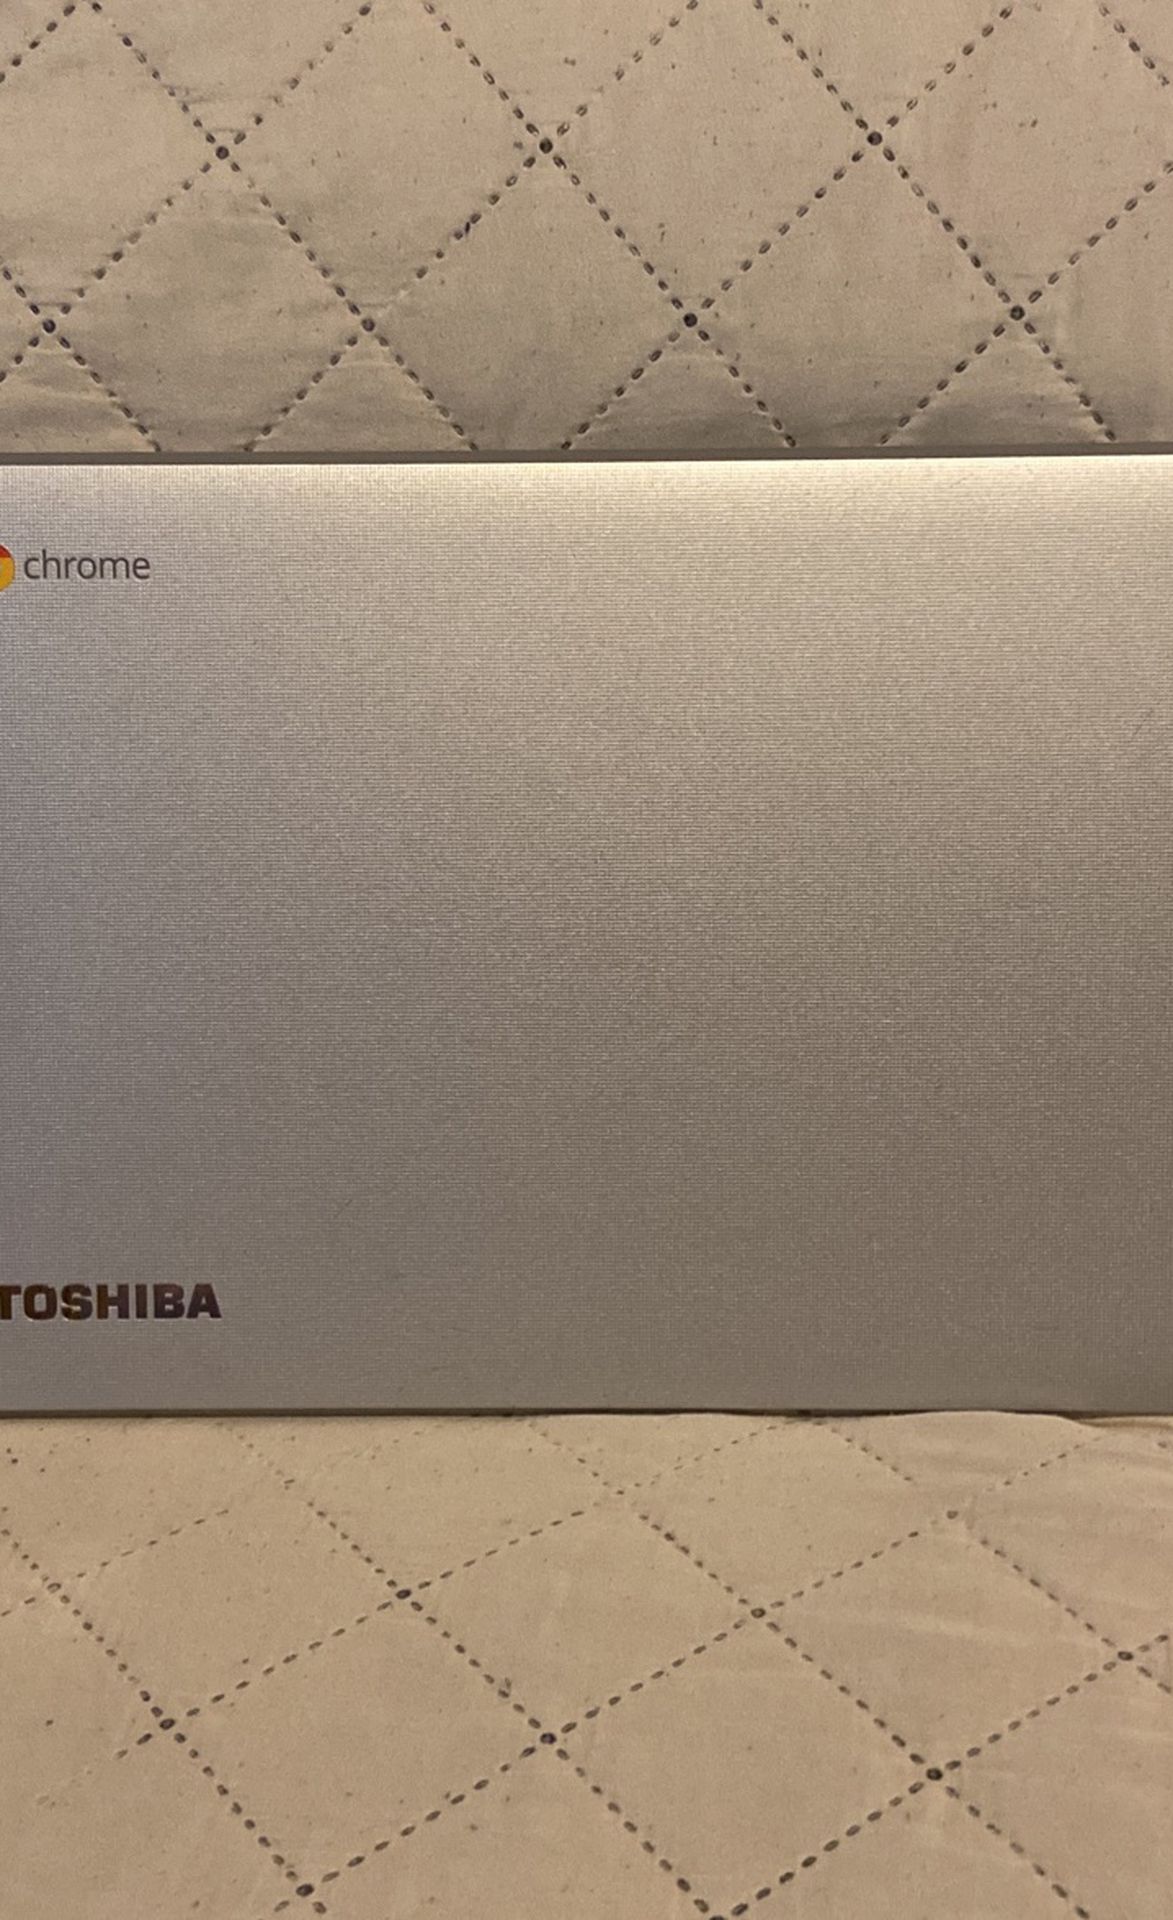 13 inch Toshiba chrome book Intel processor 100 GB of Google Drive storage included with Skullcandy built-in speakers